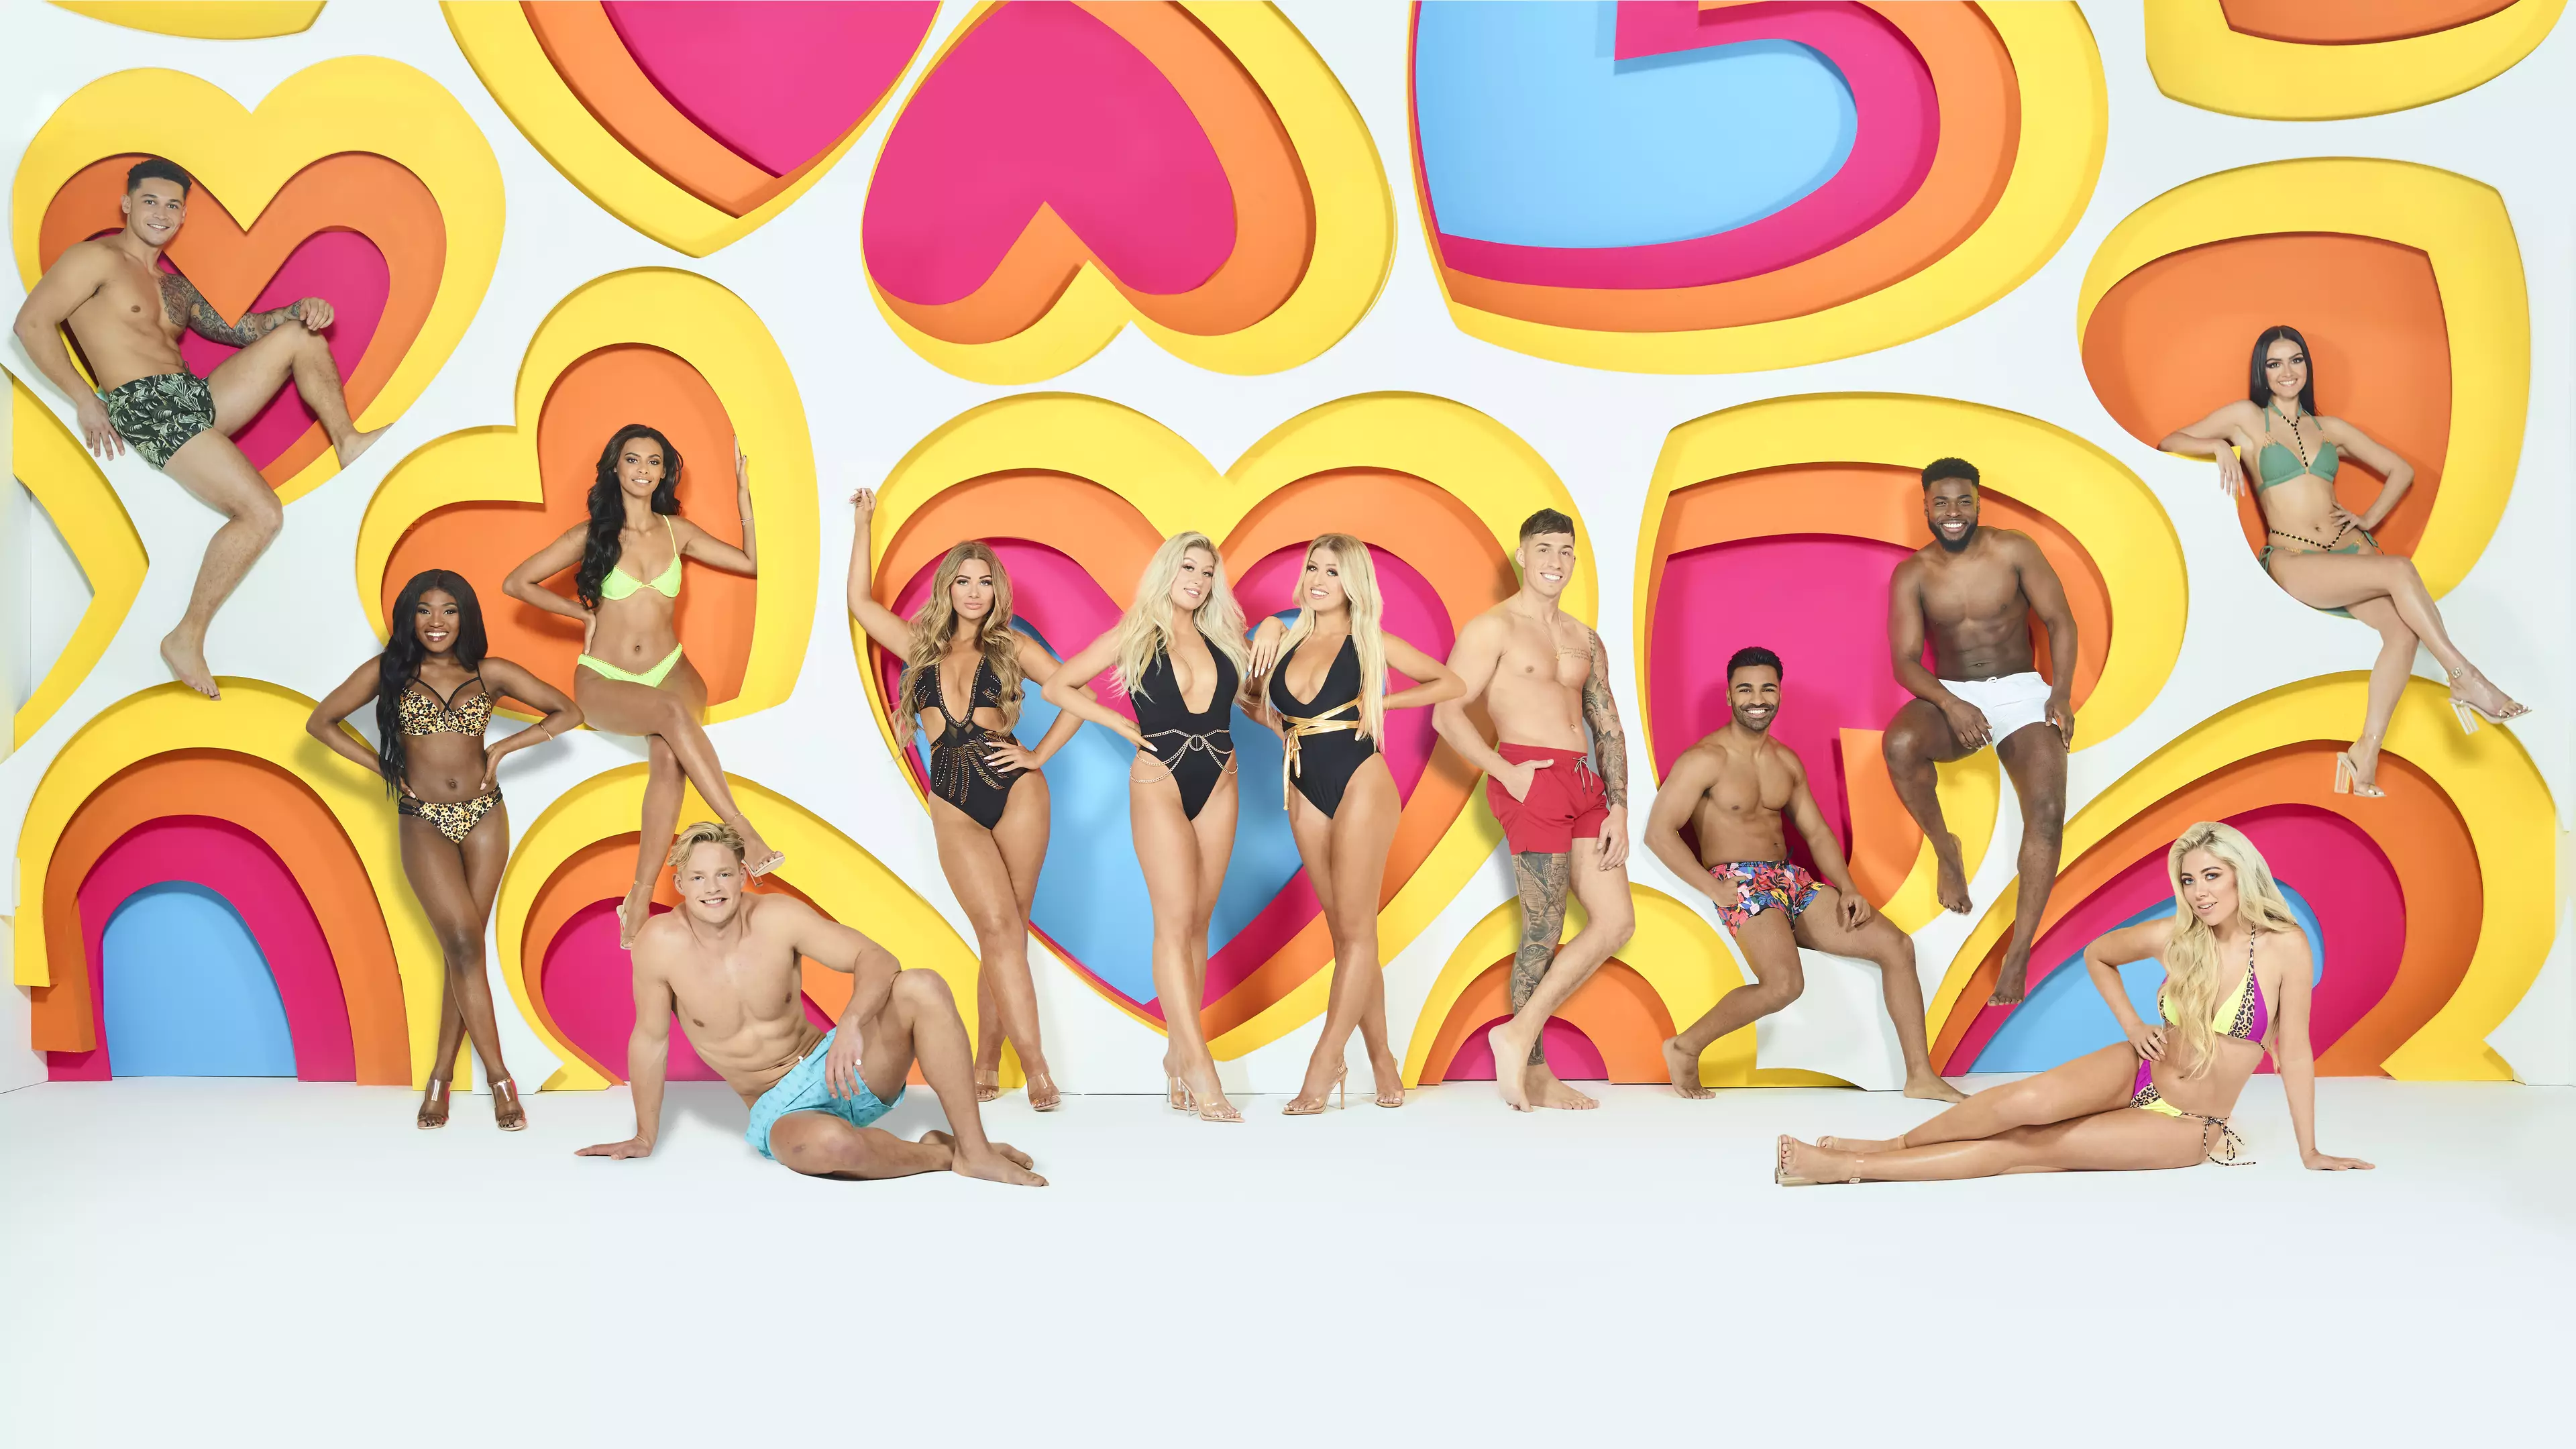 The new cast of Love Island are now in the villa and hurtful opinions have already started to surface (